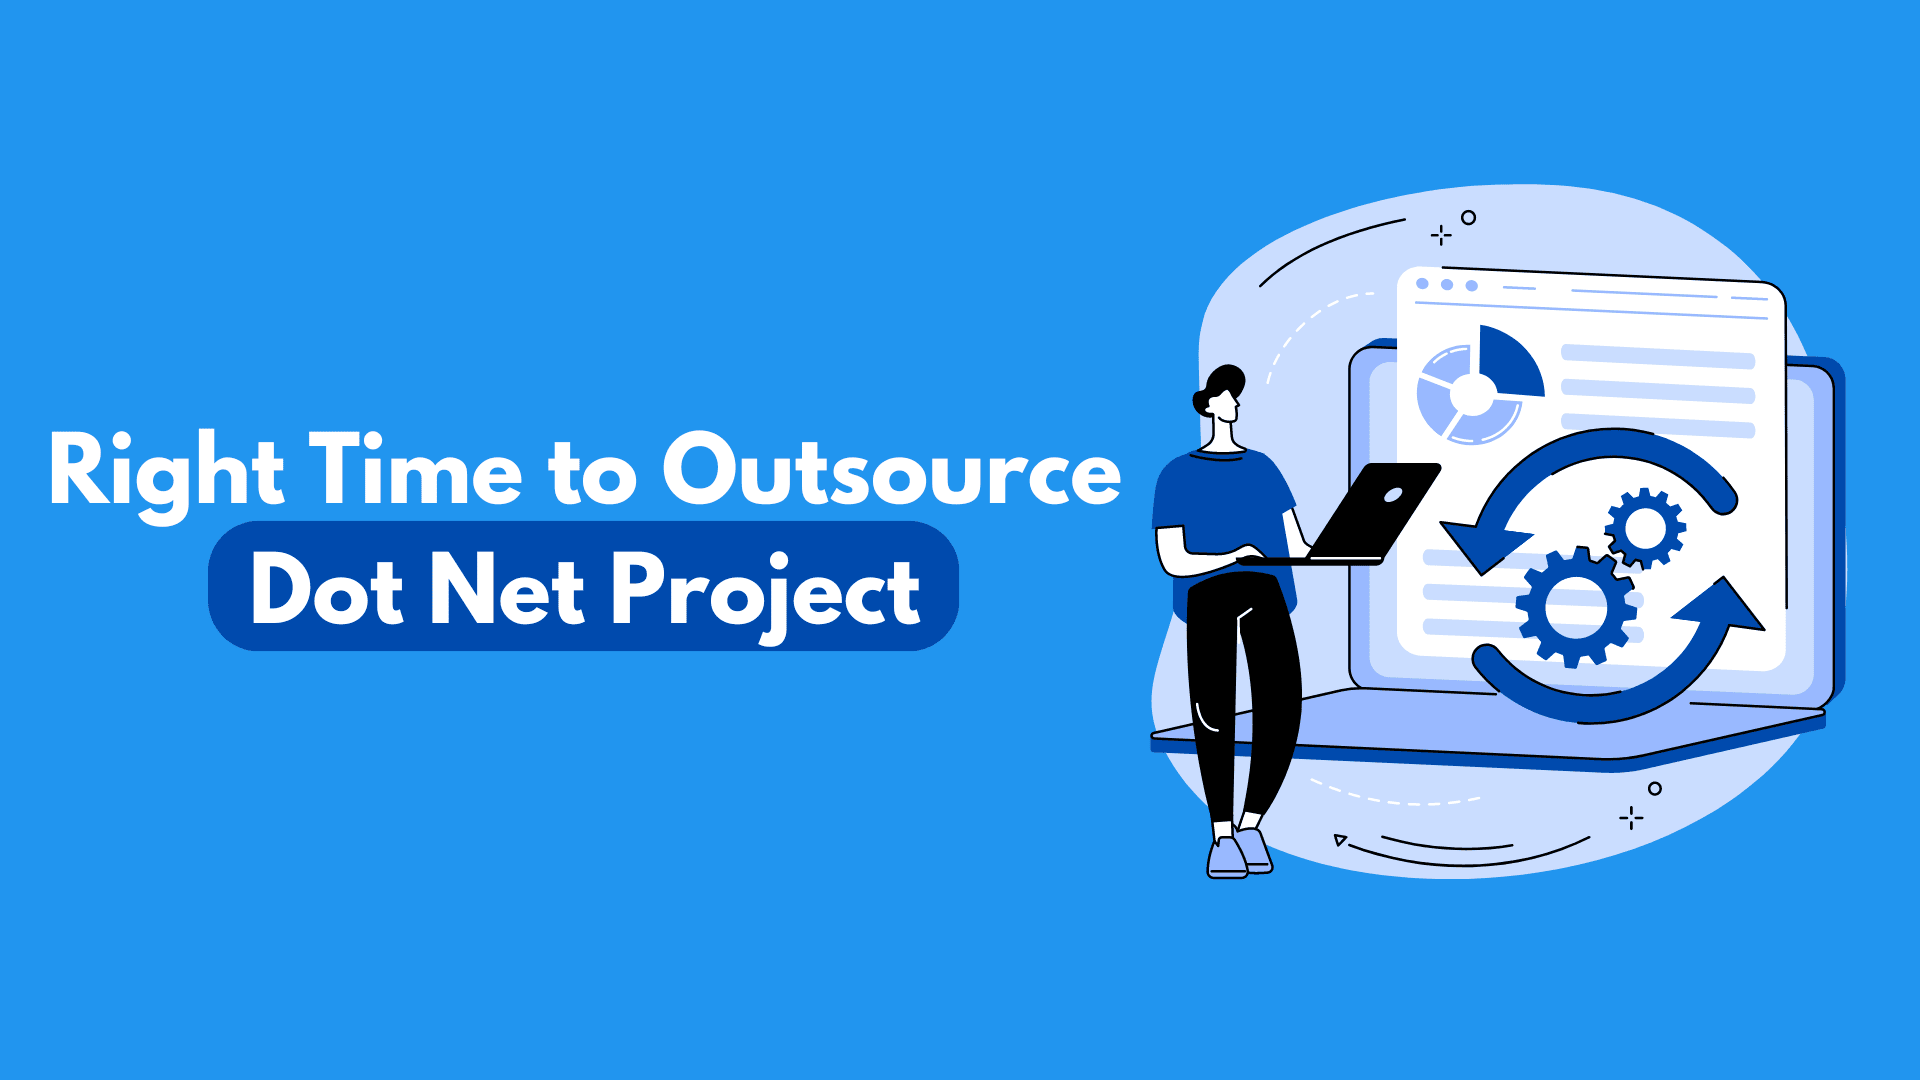 When Is the Right Time to Outsource a Dot Net Project?